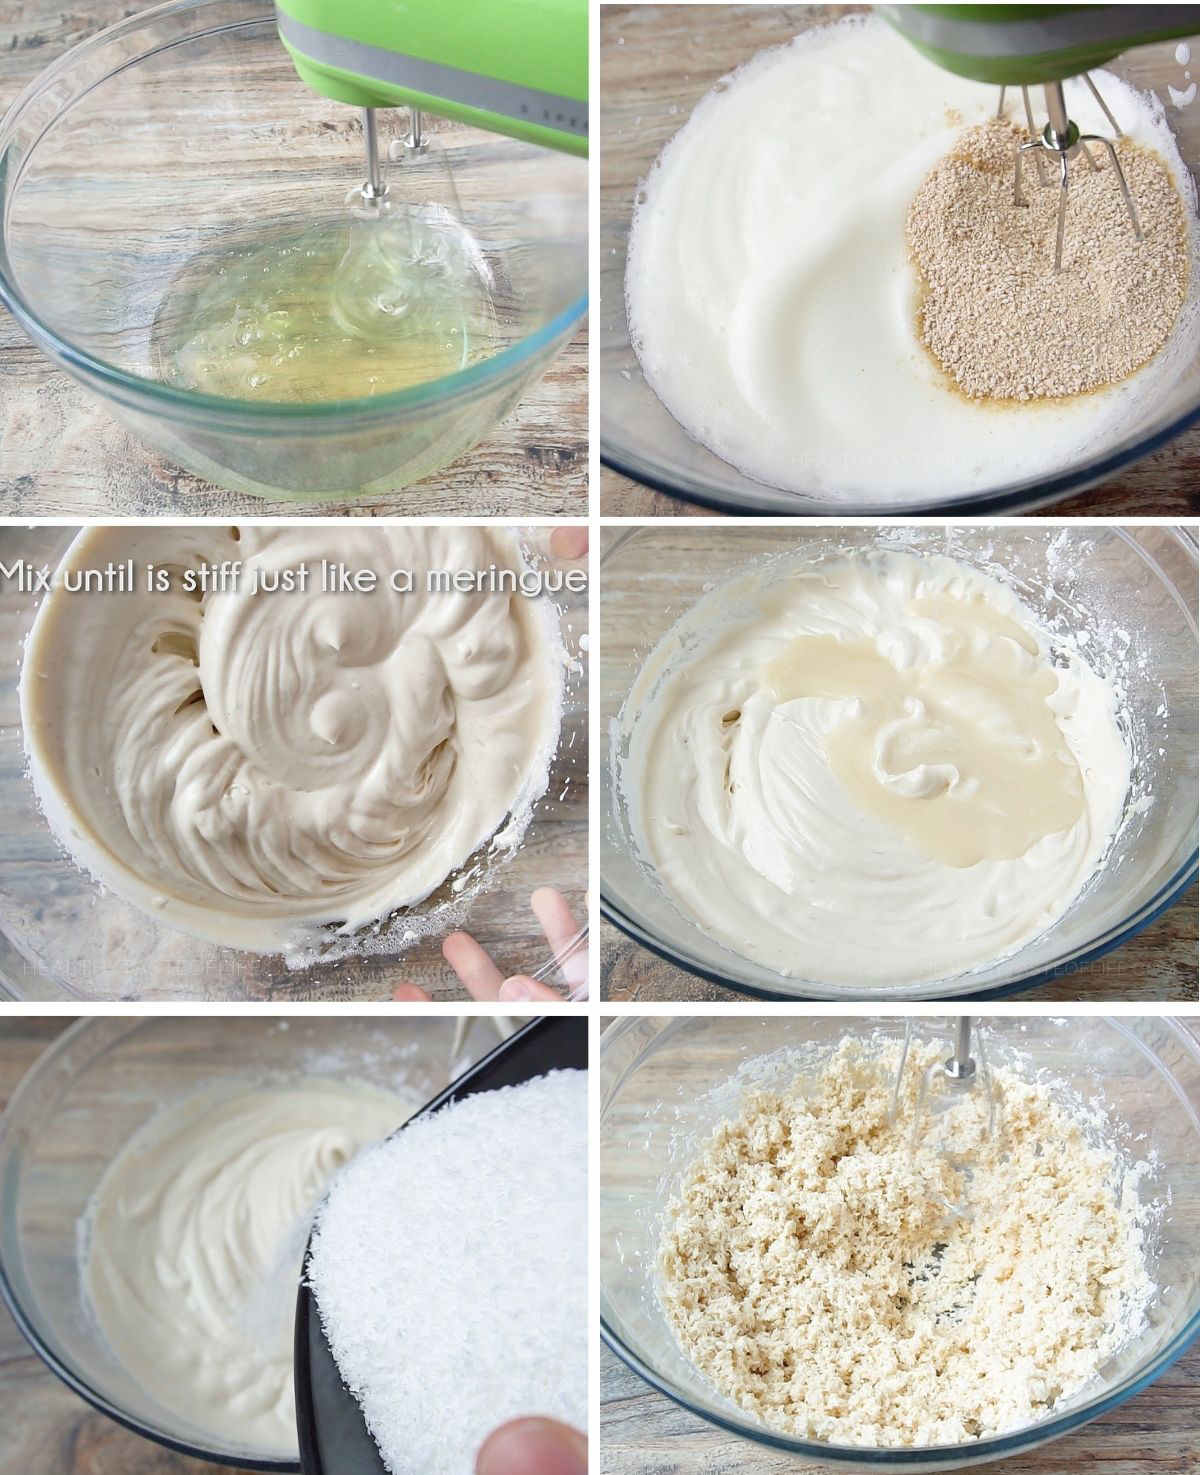 Process shots showing how to make dairy free macaroons by beating the egg whites and mixing with shredded coconut.